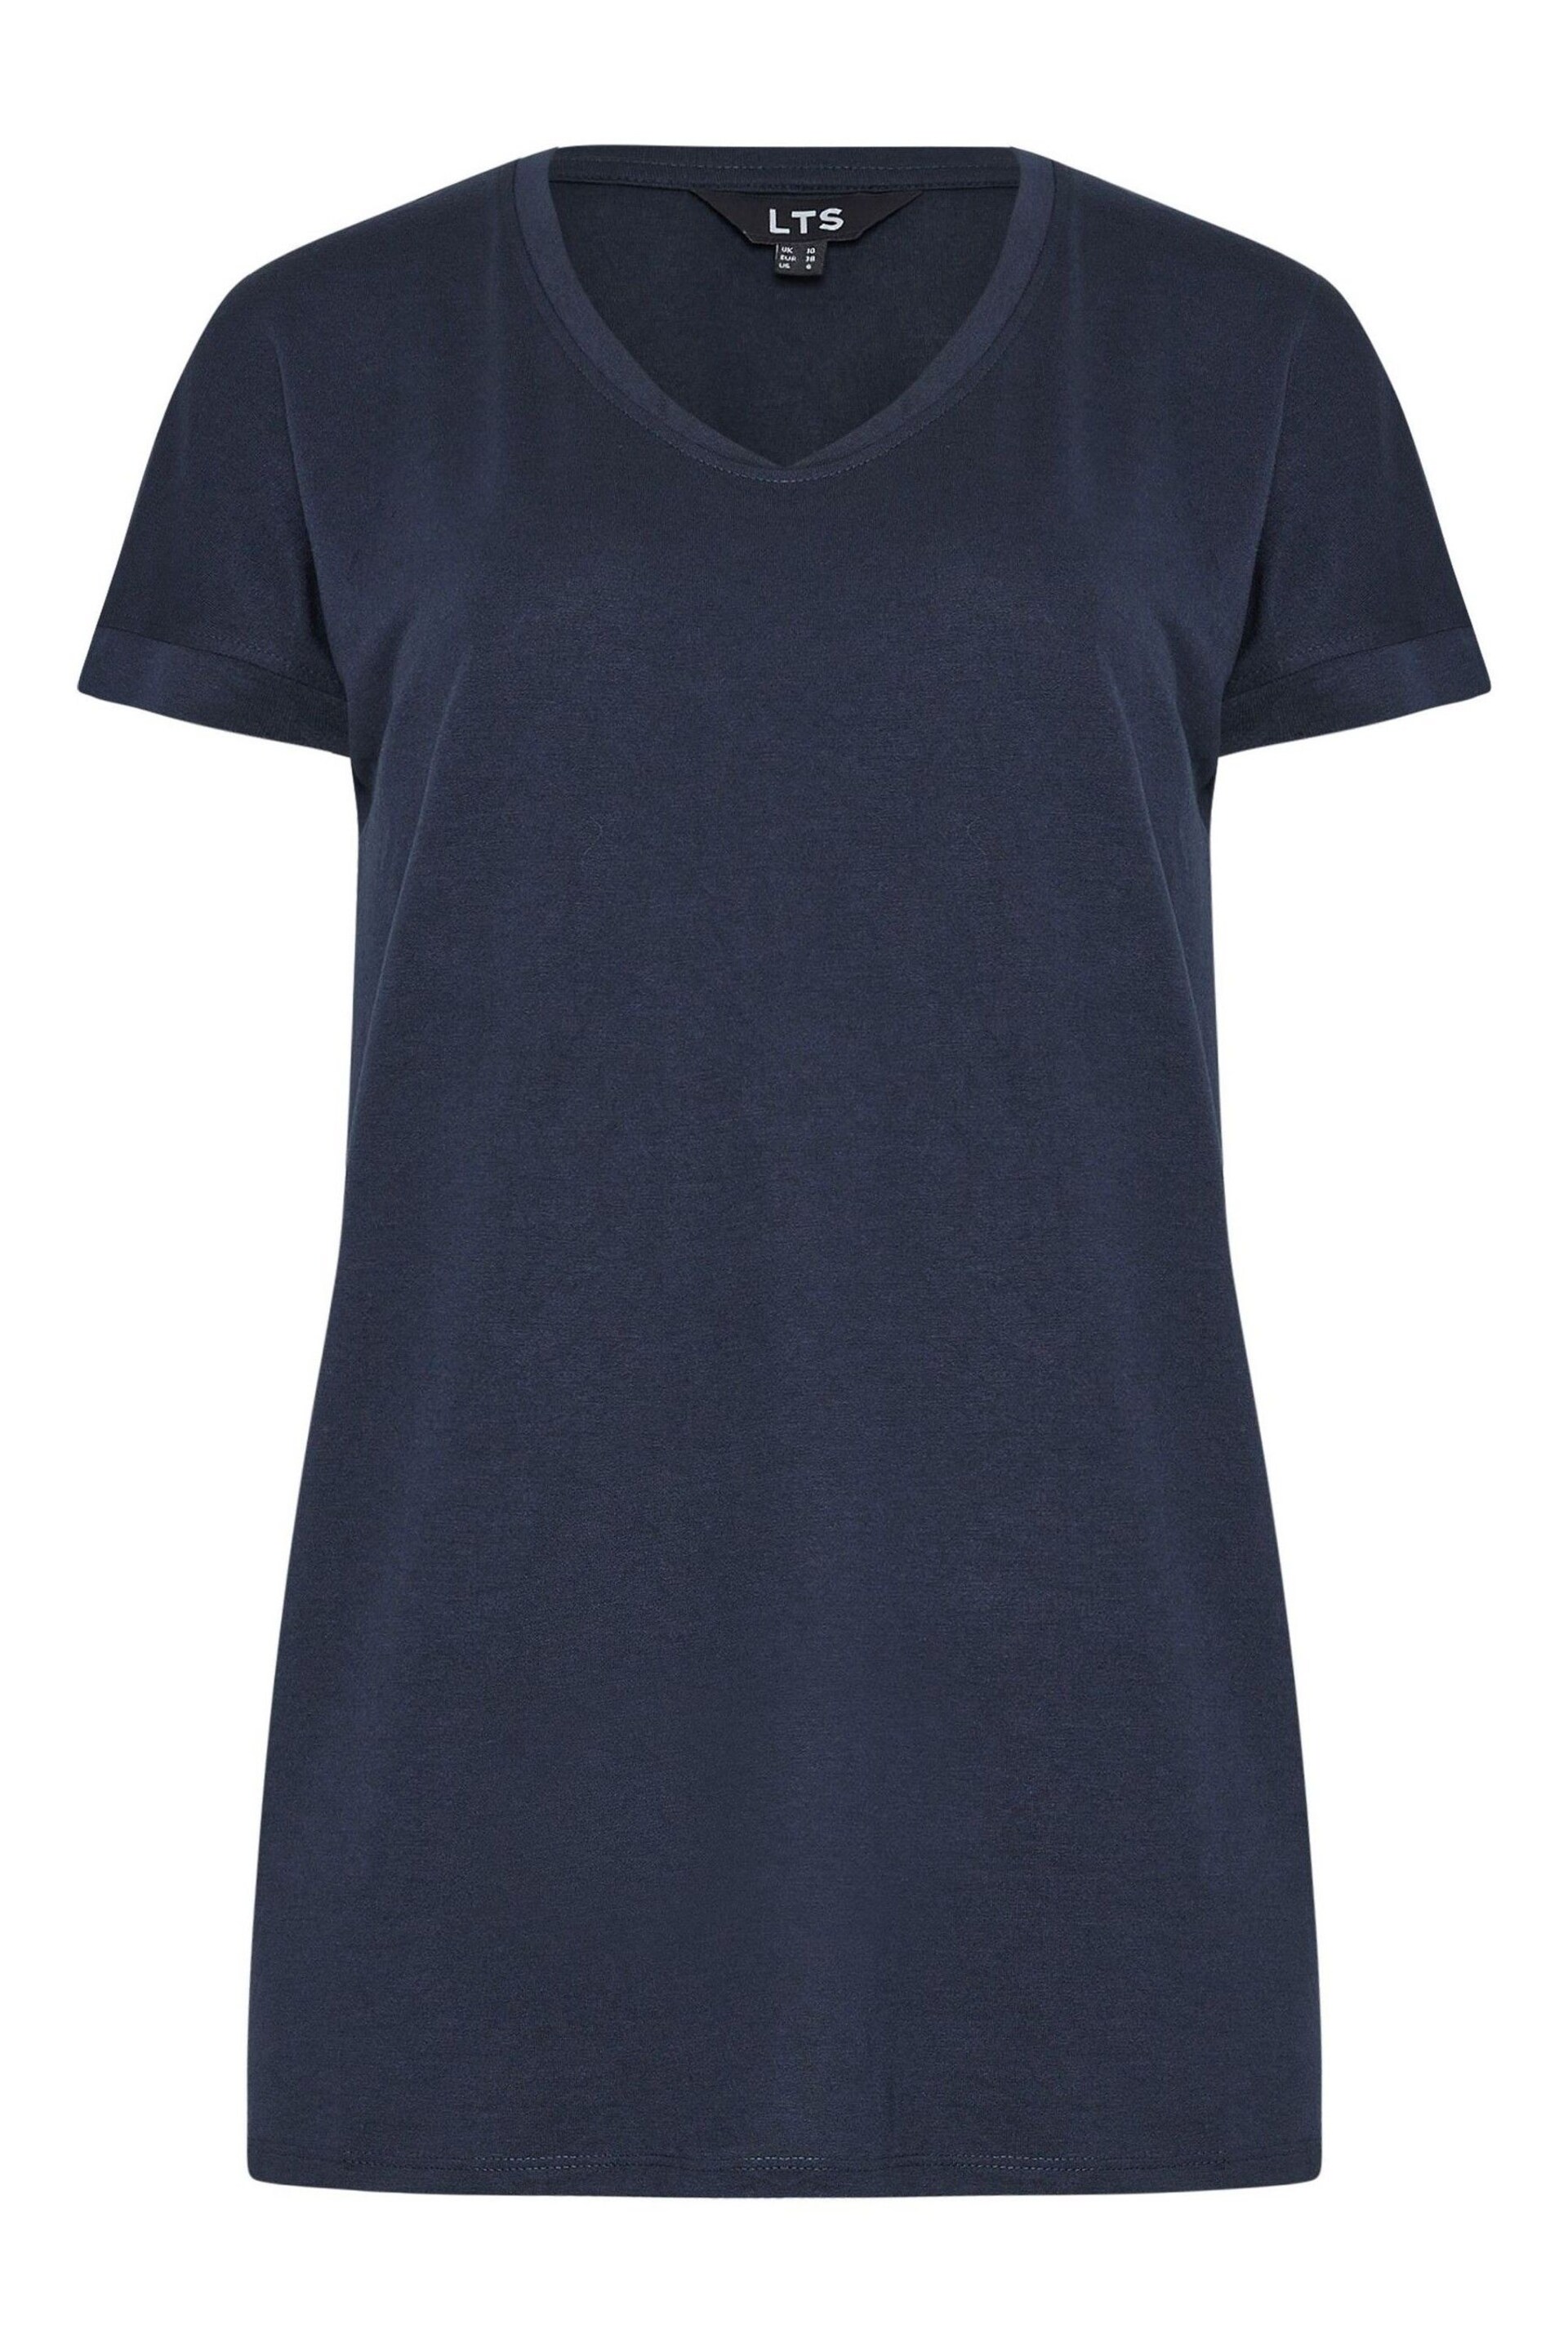 Long Tall Sally White LTS 2 PACK Tall Navy Blue & White Short Sleeve T-Shirts - Image 3 of 3